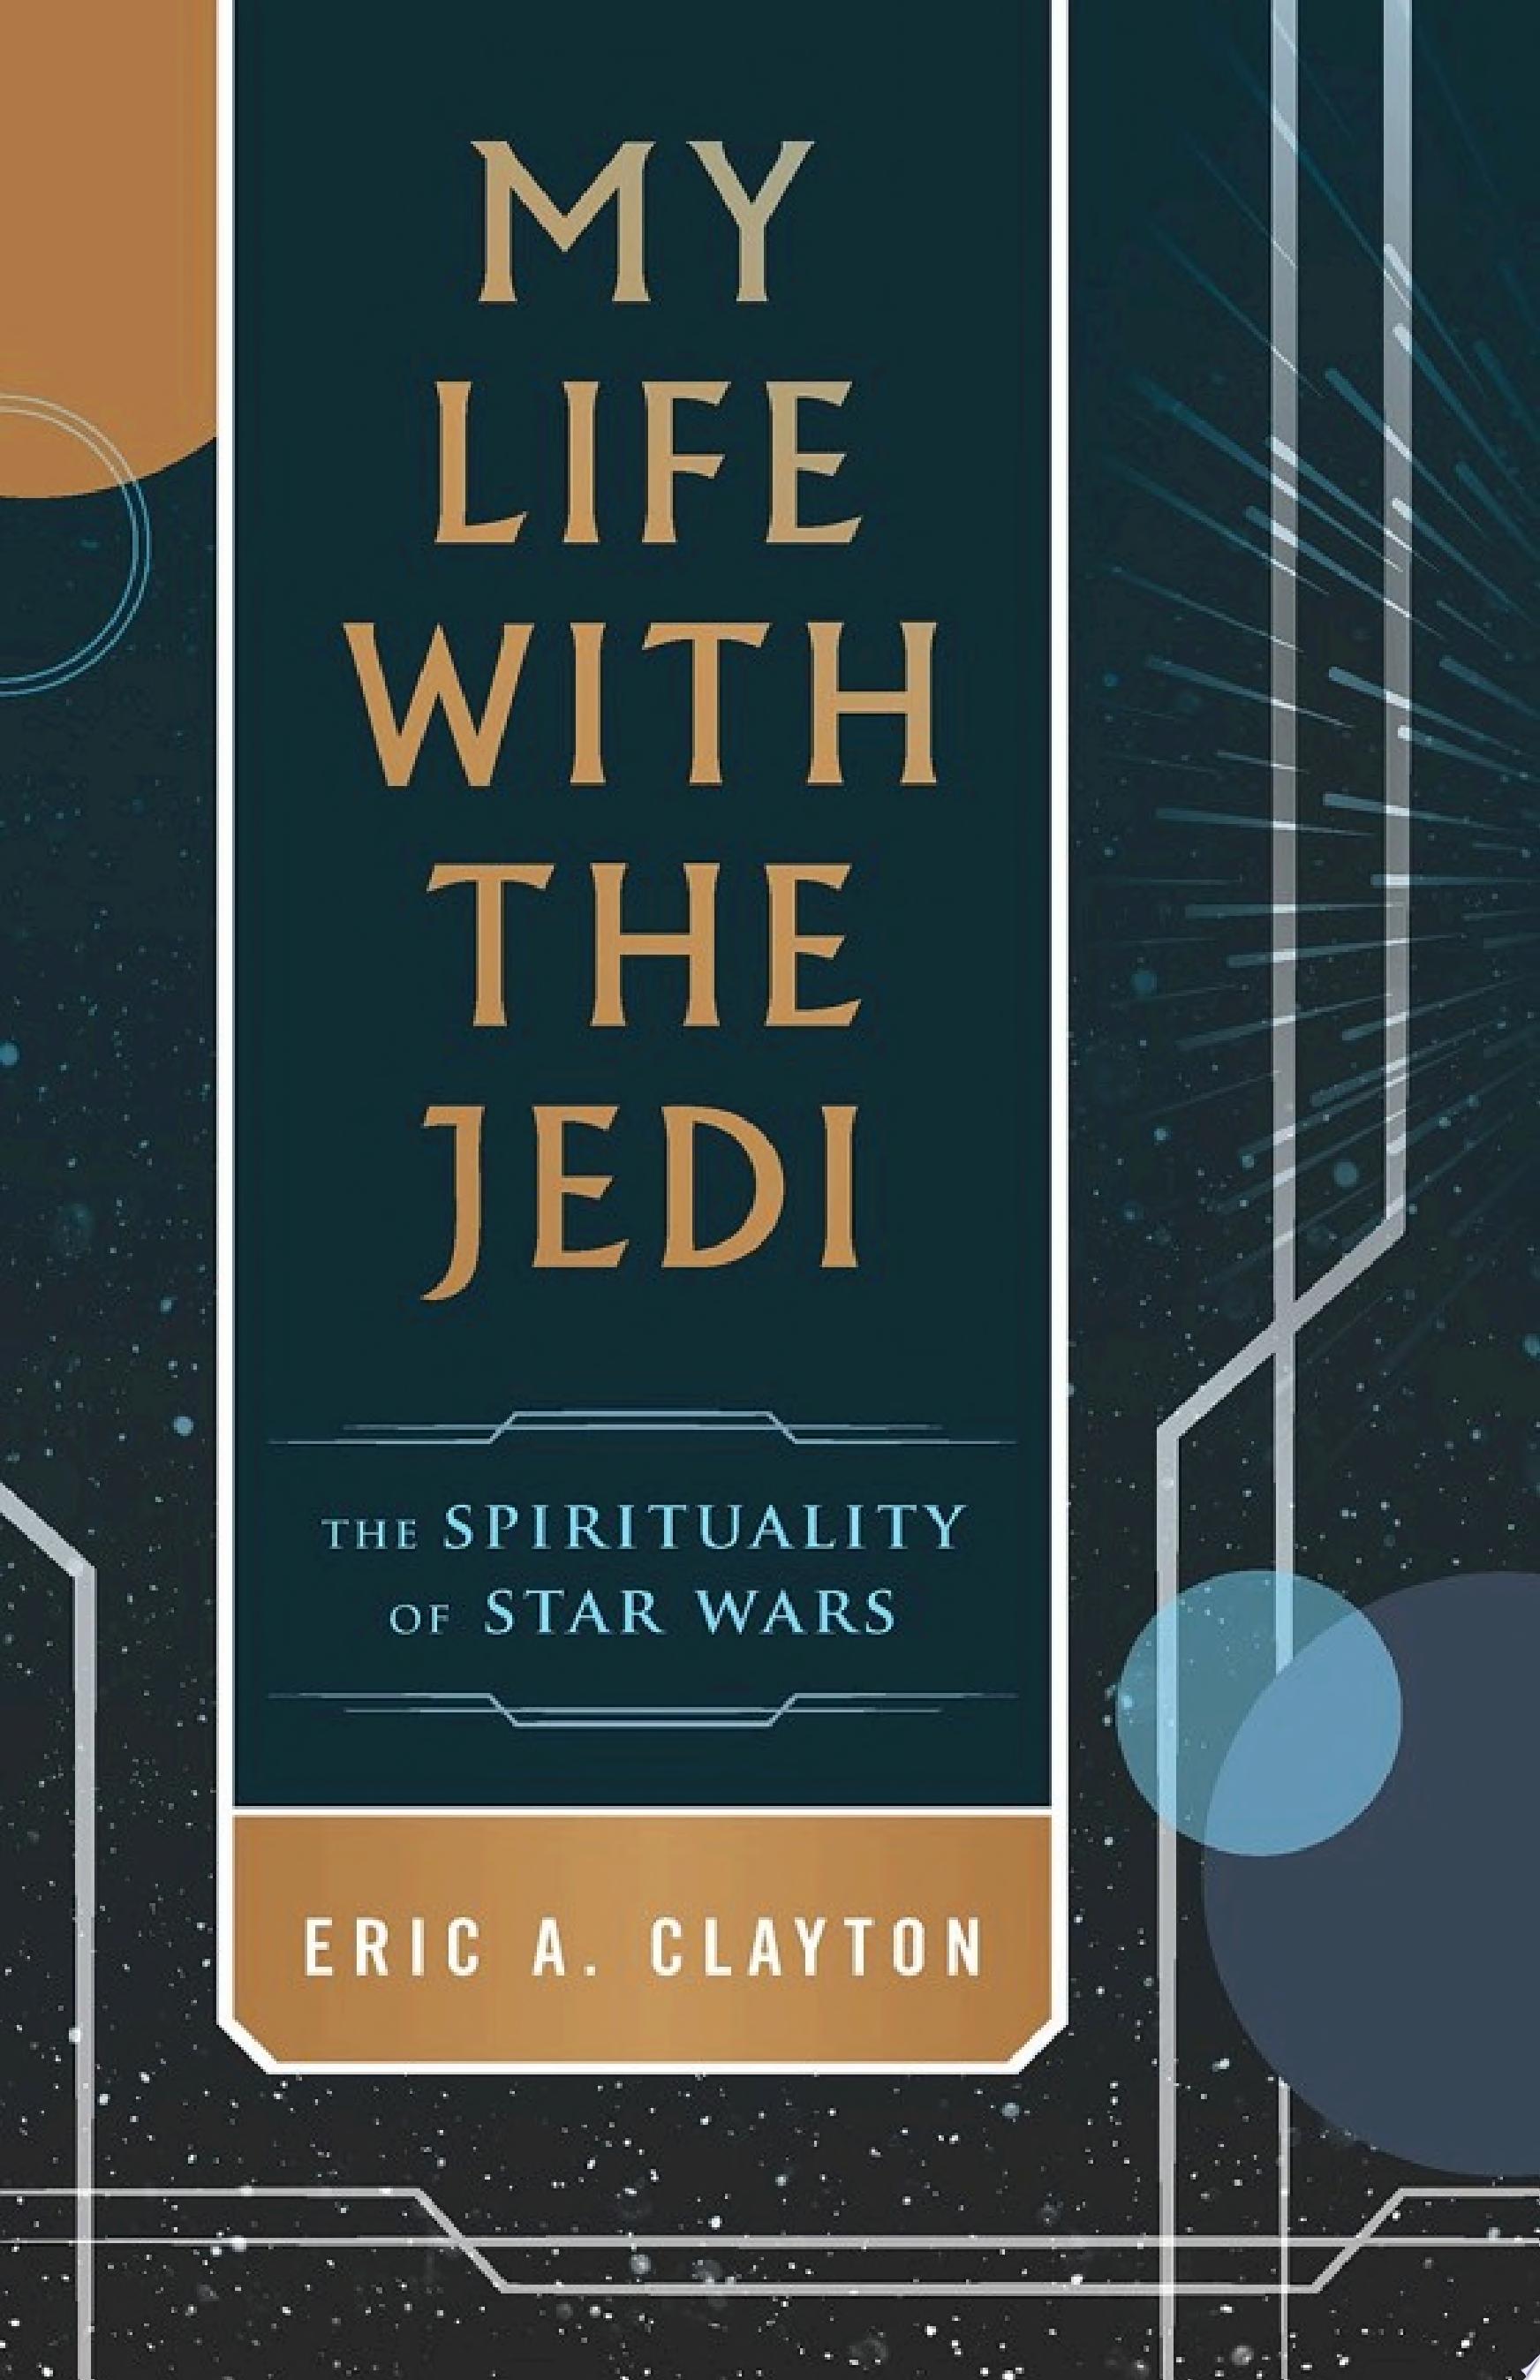 Image for "My Life with the Jedi"